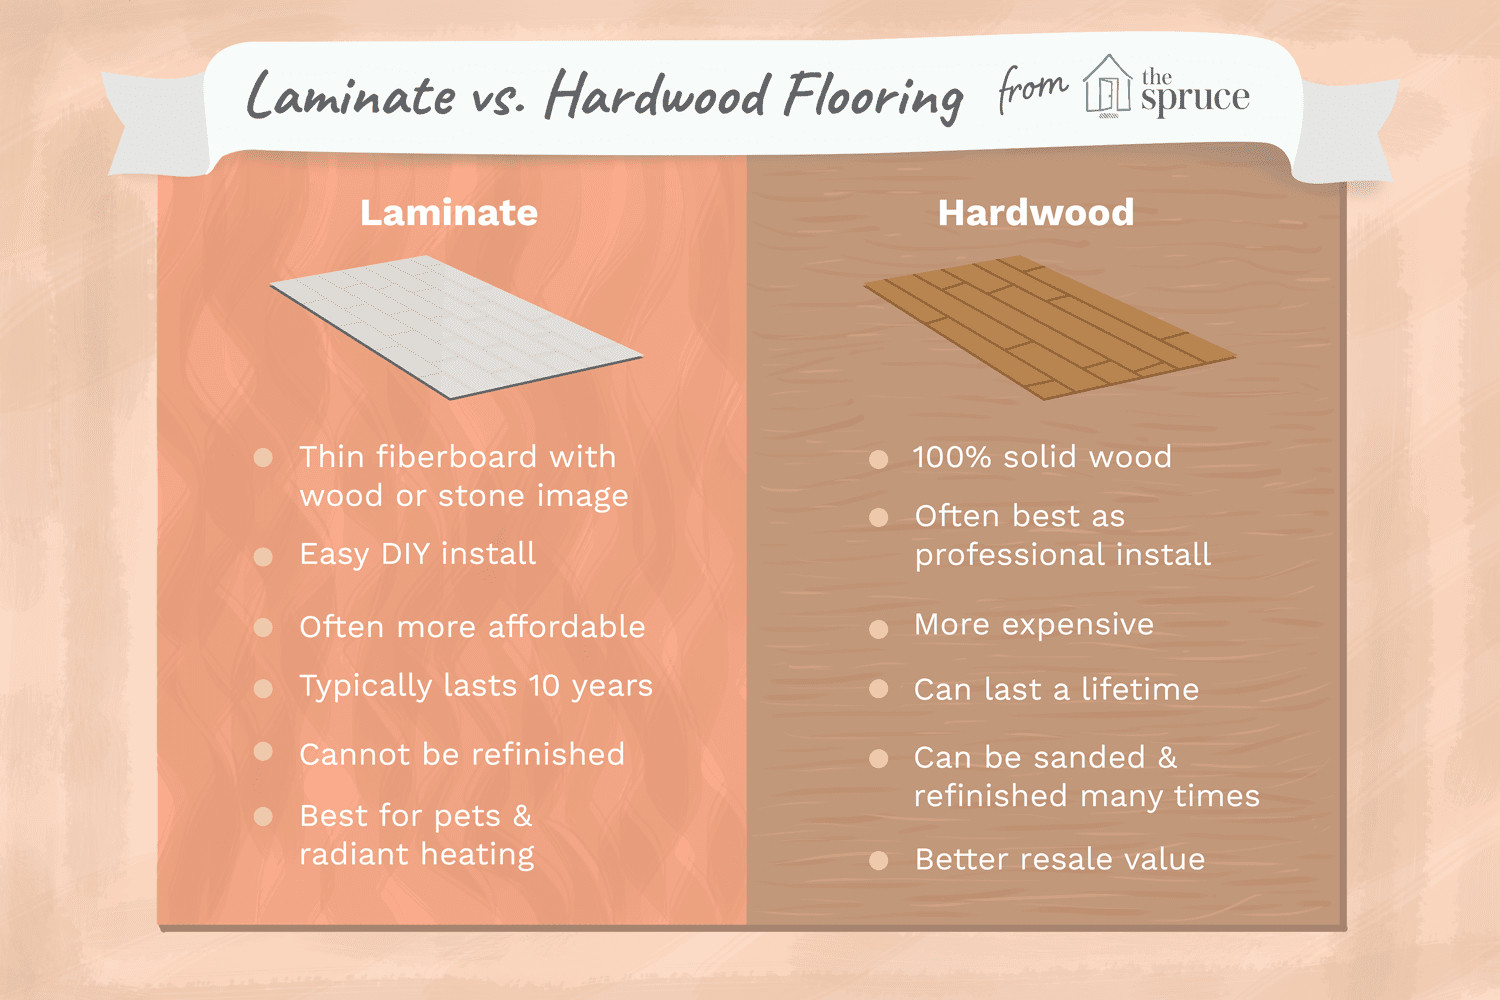 hardwood flooring installation utah of laminate vs hardwood doesnt have to be a hard decision pertaining to laminate vs hardwood flooring how they compare 1821870 final 5bae84f24cedfd0026f4205d